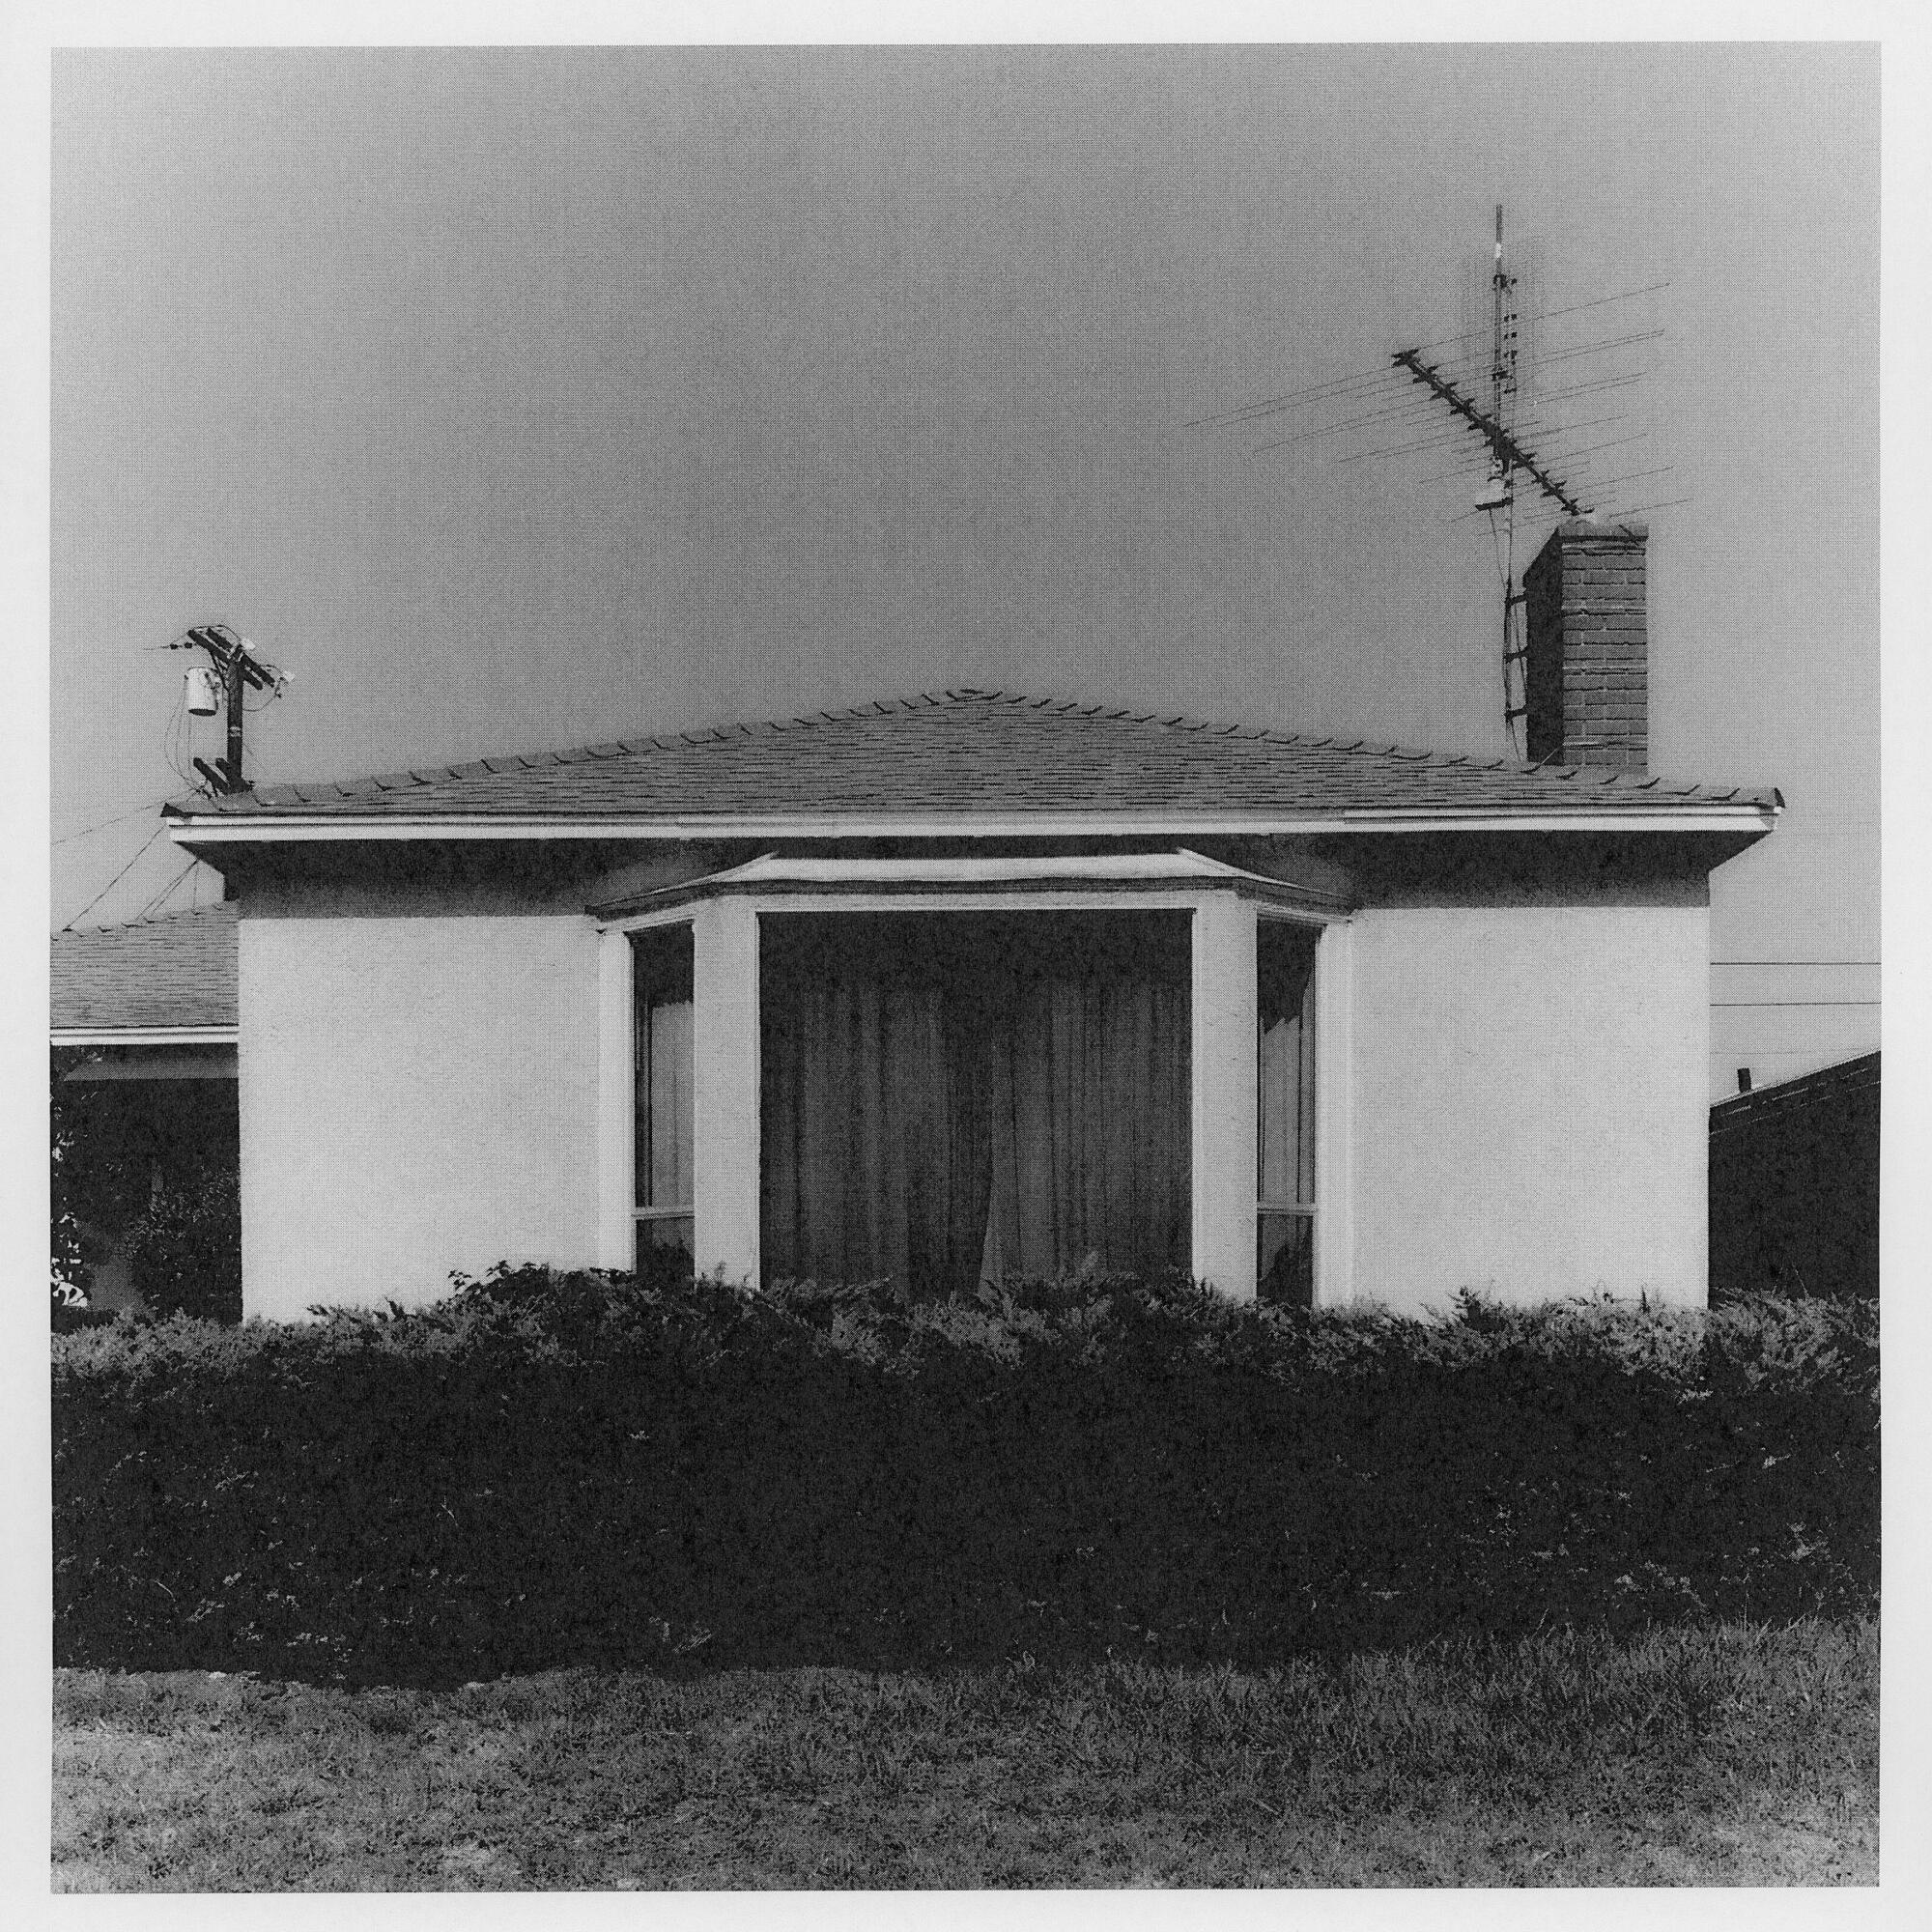 A black and white photo of a house with some bushes in front.